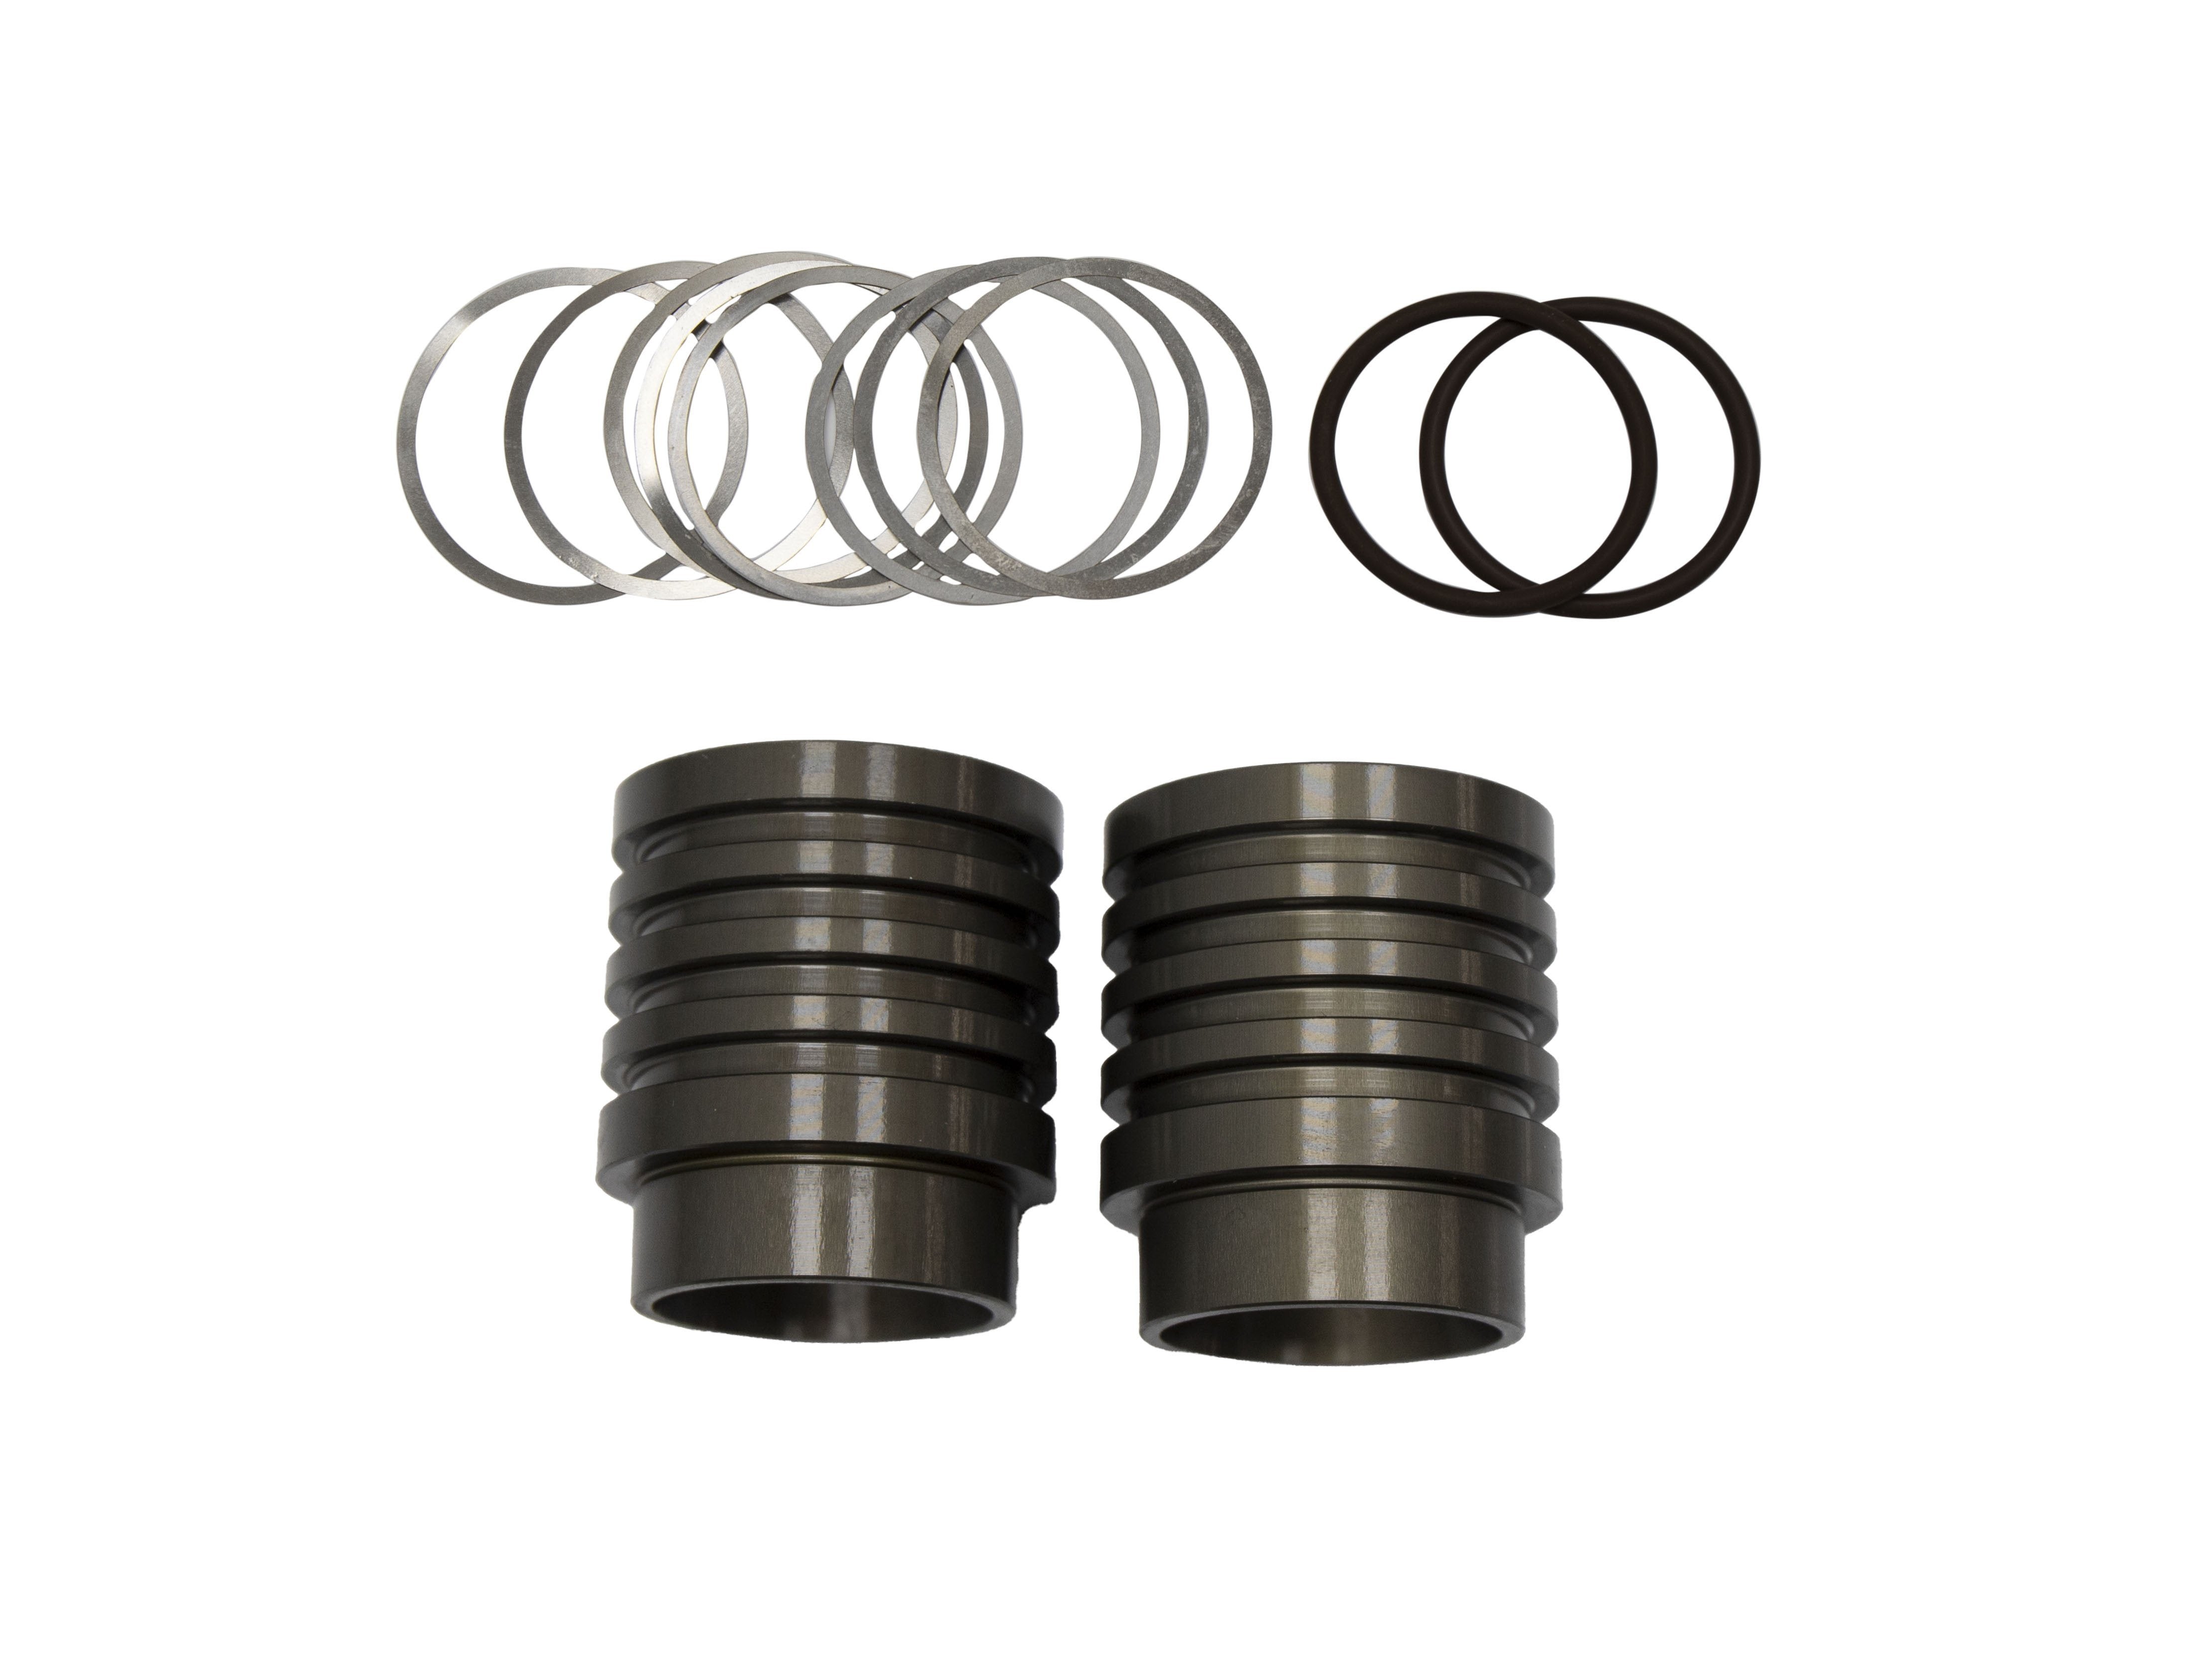 TRS21 Upgraded Cylinder Replacement Kit, w/Shims Fits BVV4CYL & BVV2CYL